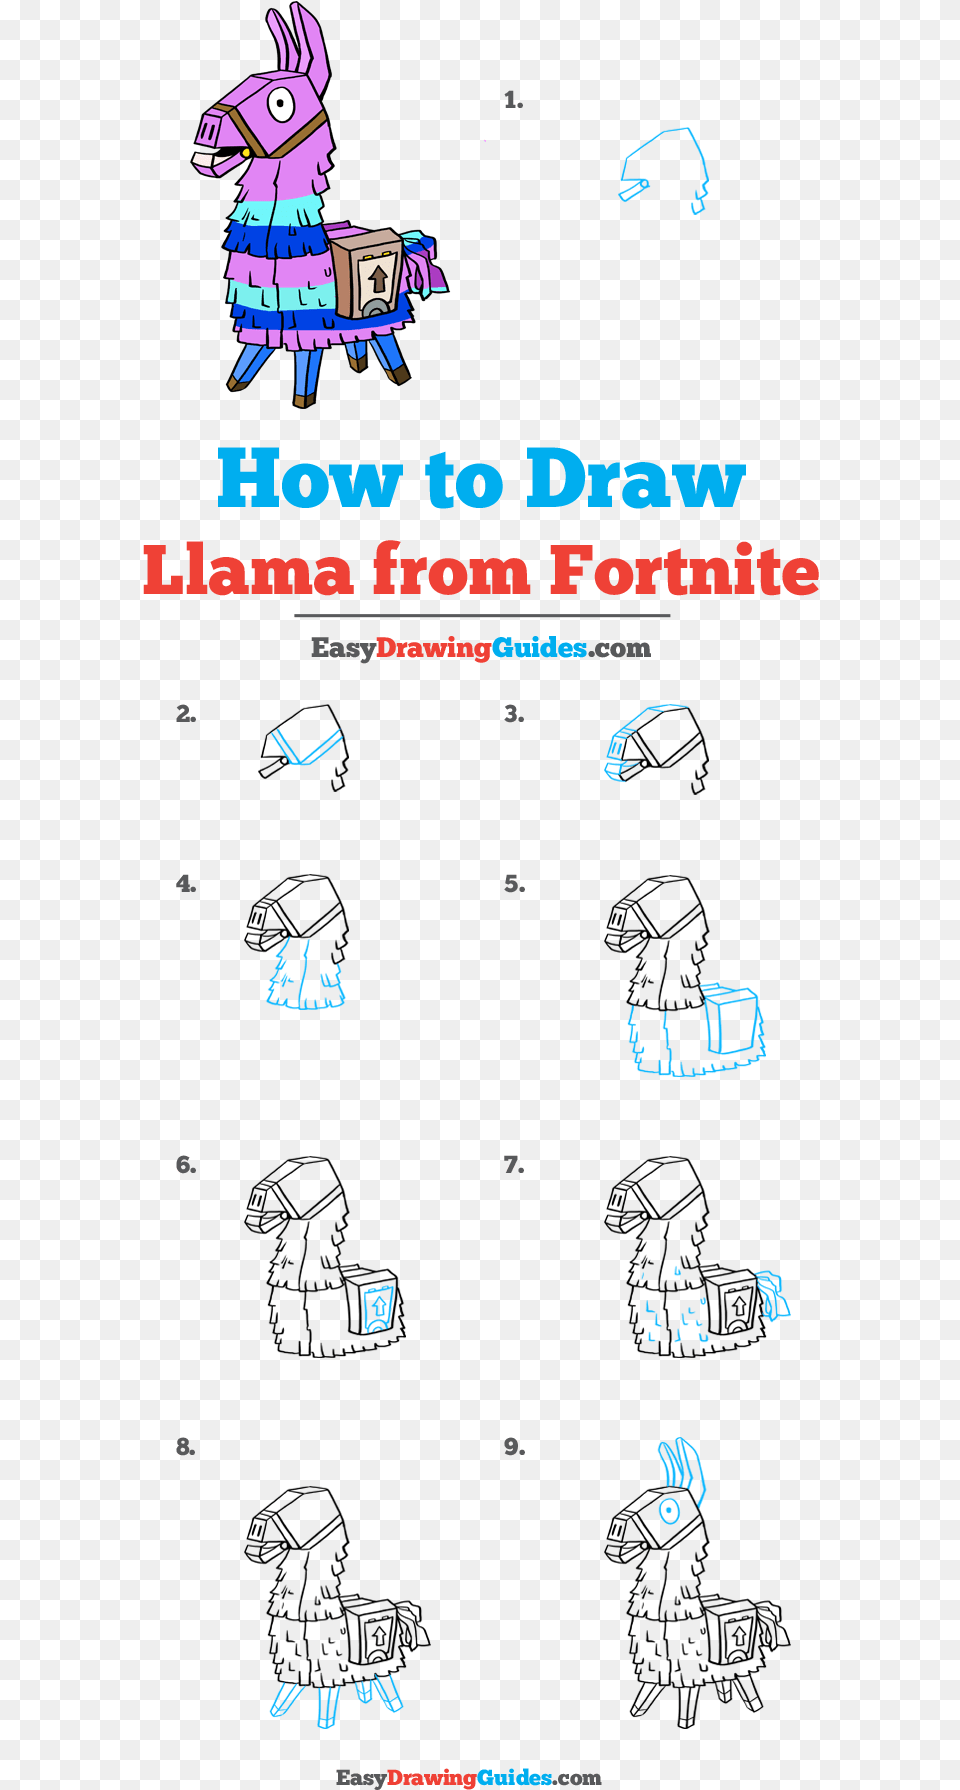 How To Draw Llama From Fortnite Draw A Llama From Fortnite, Text Free Transparent Png